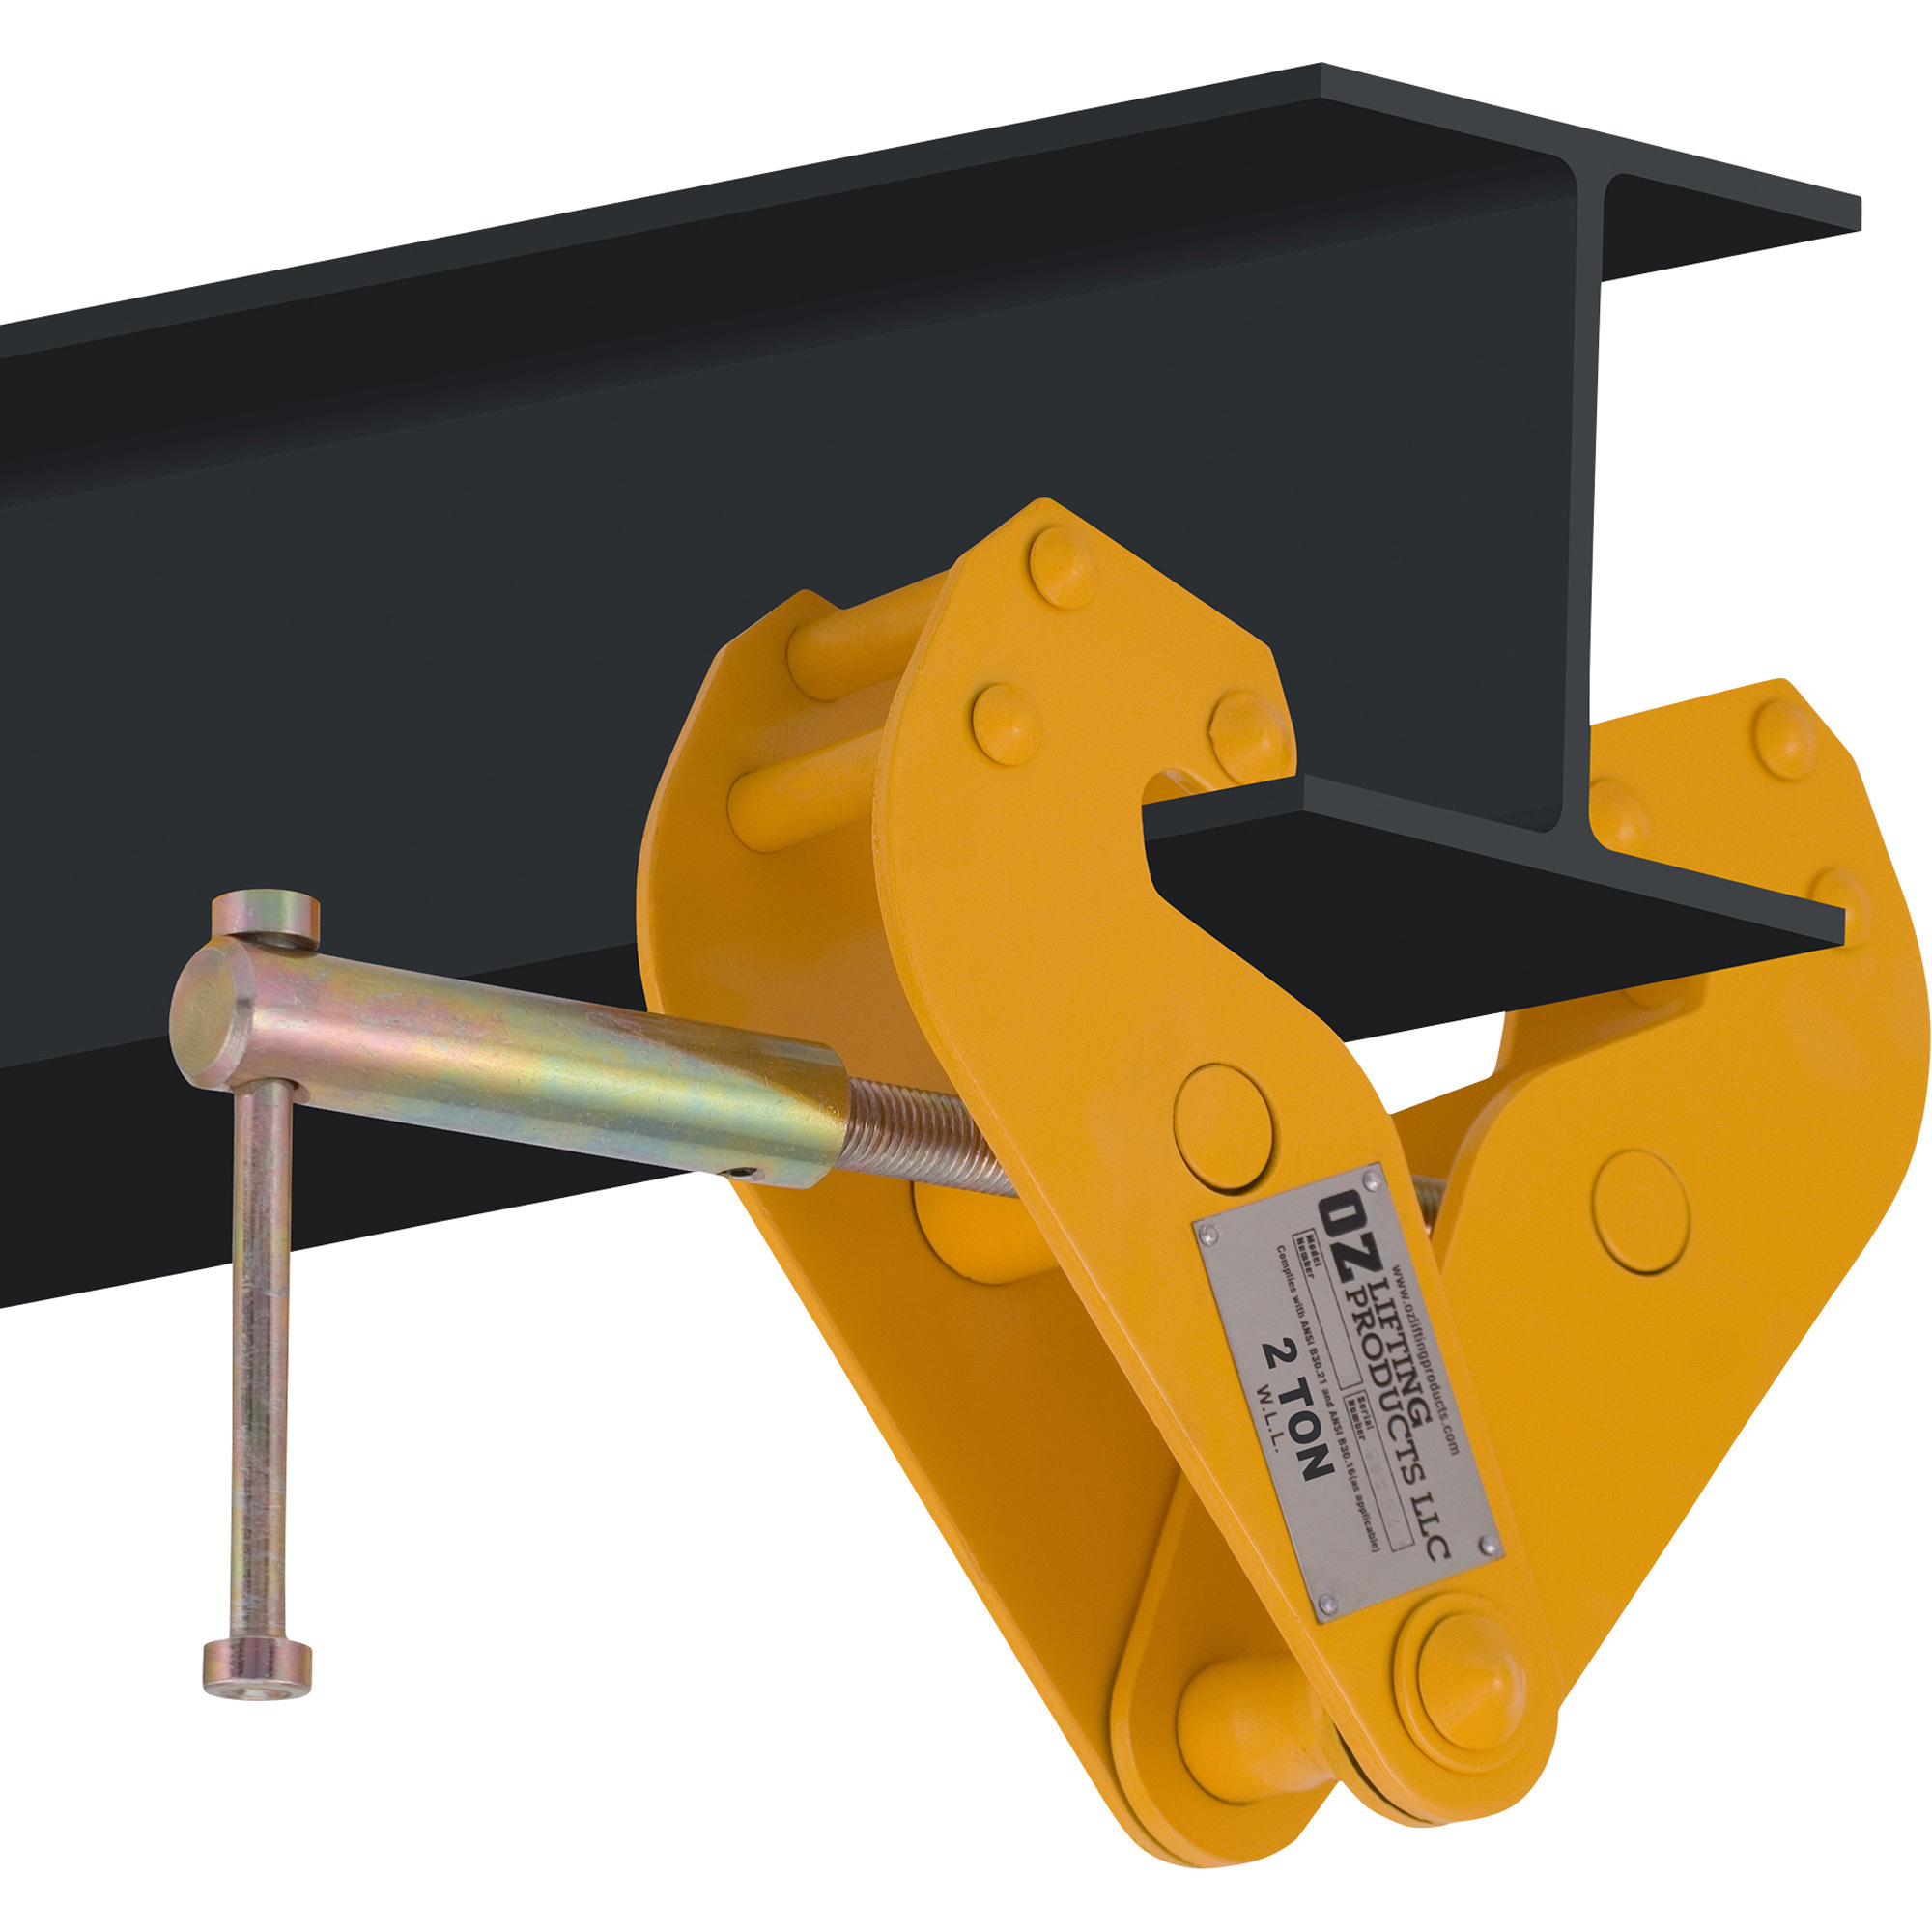 OZ Lifting Products Beam Clamp â 2-Ton Capacity, Model OZ2BC